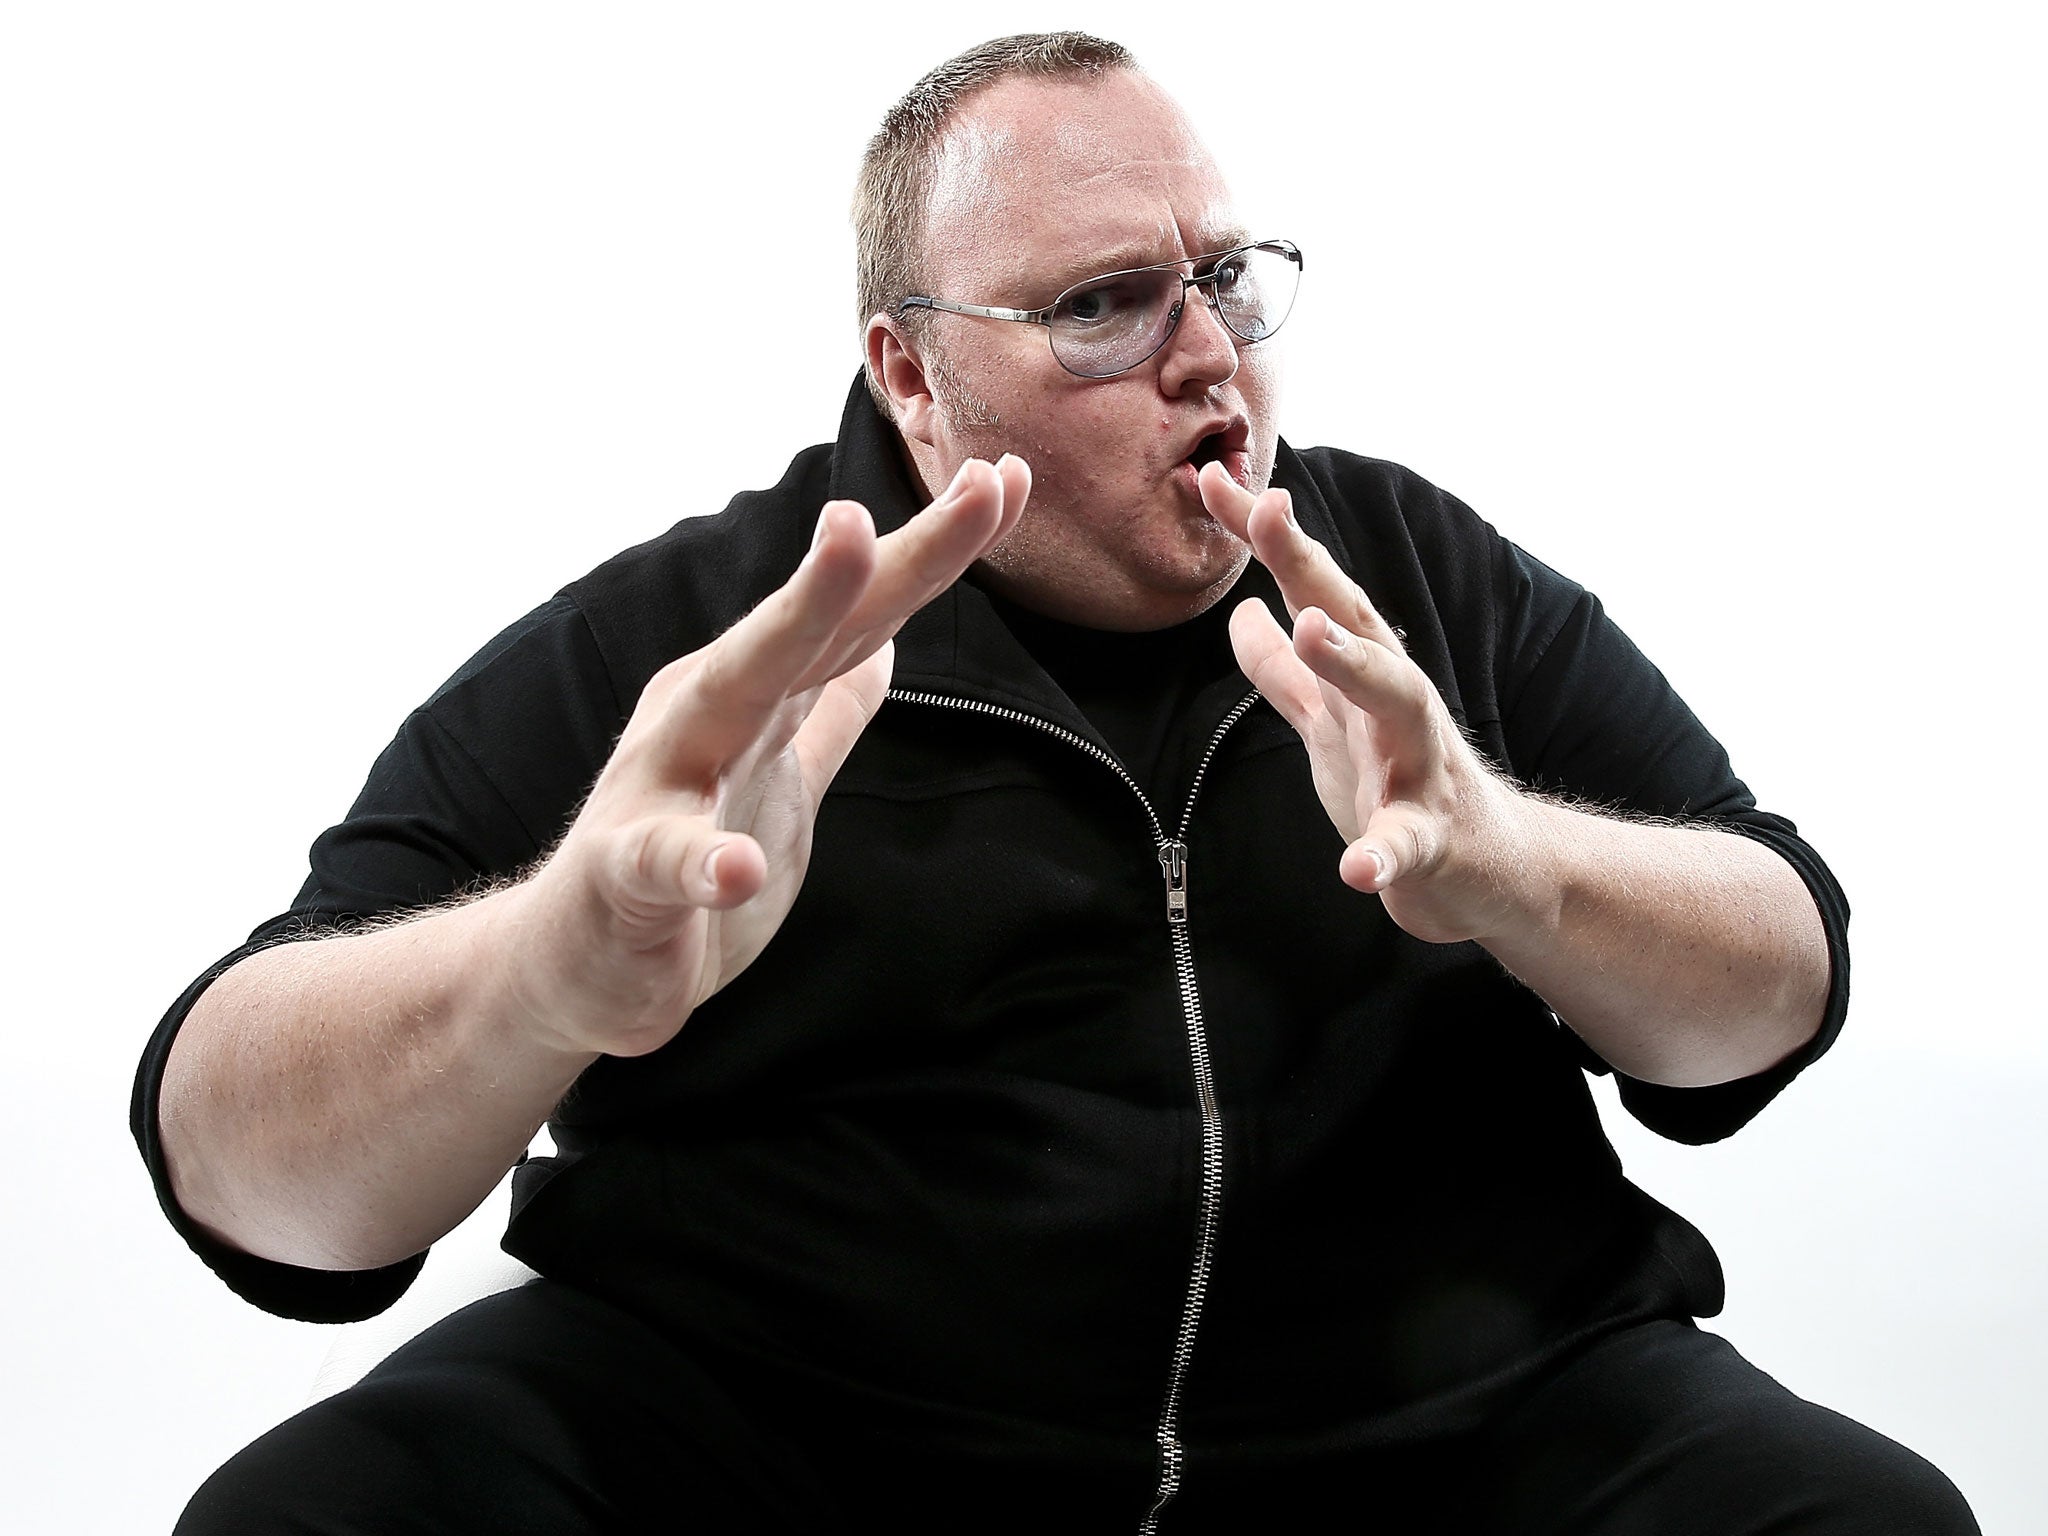 Kim Dotcom, internet entrepreneur and founder of the now-defunct file-sharing website Megaupload